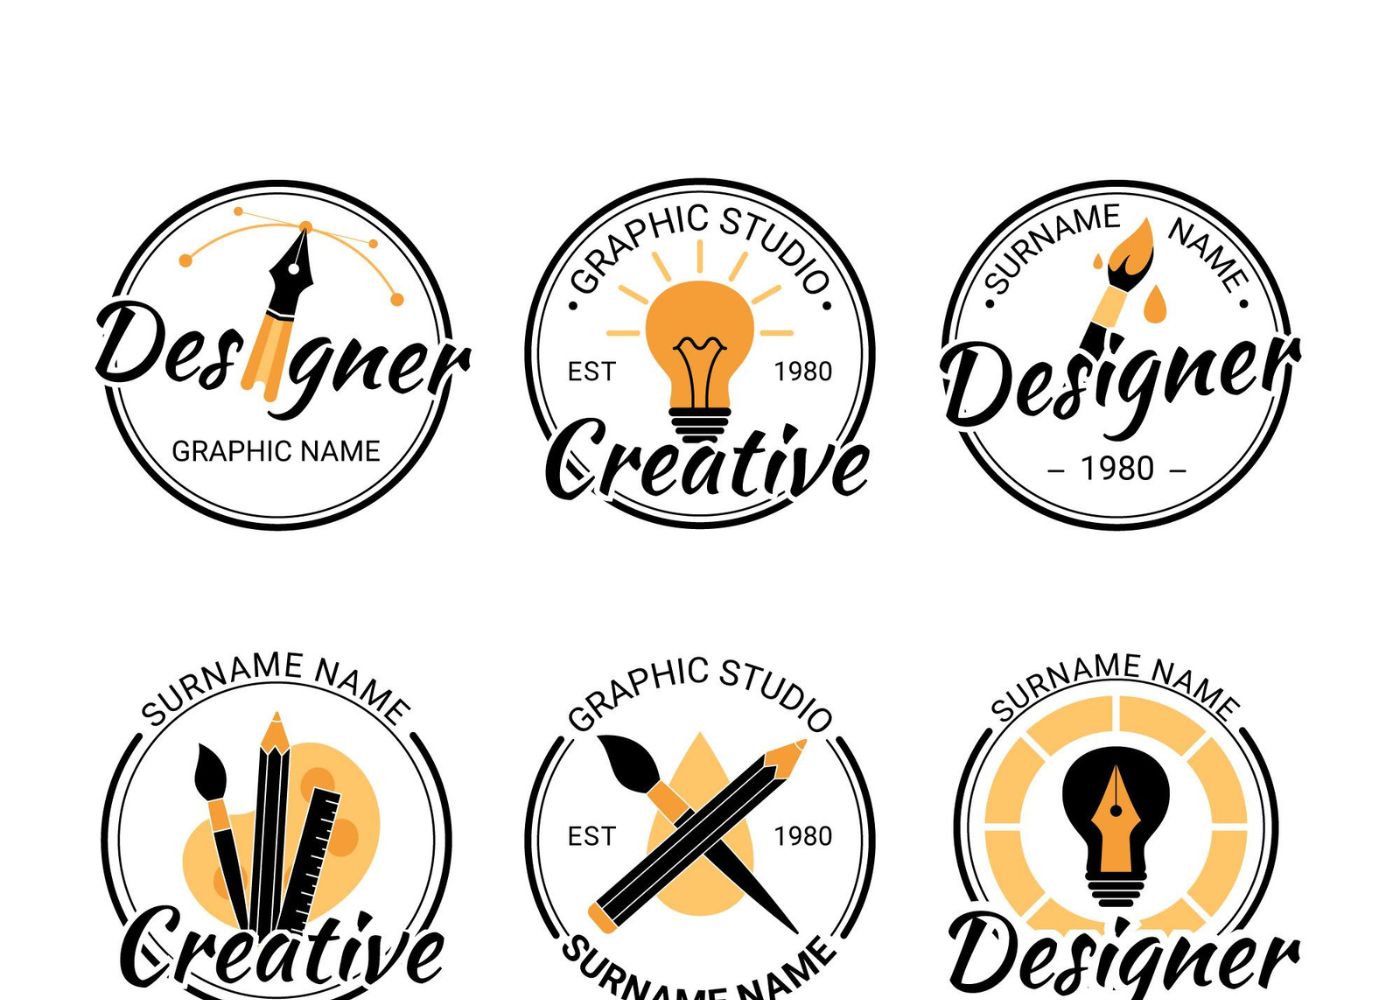 Enhance Your Brand with Leading Custom Logo Design Services Company Name digihood.agency